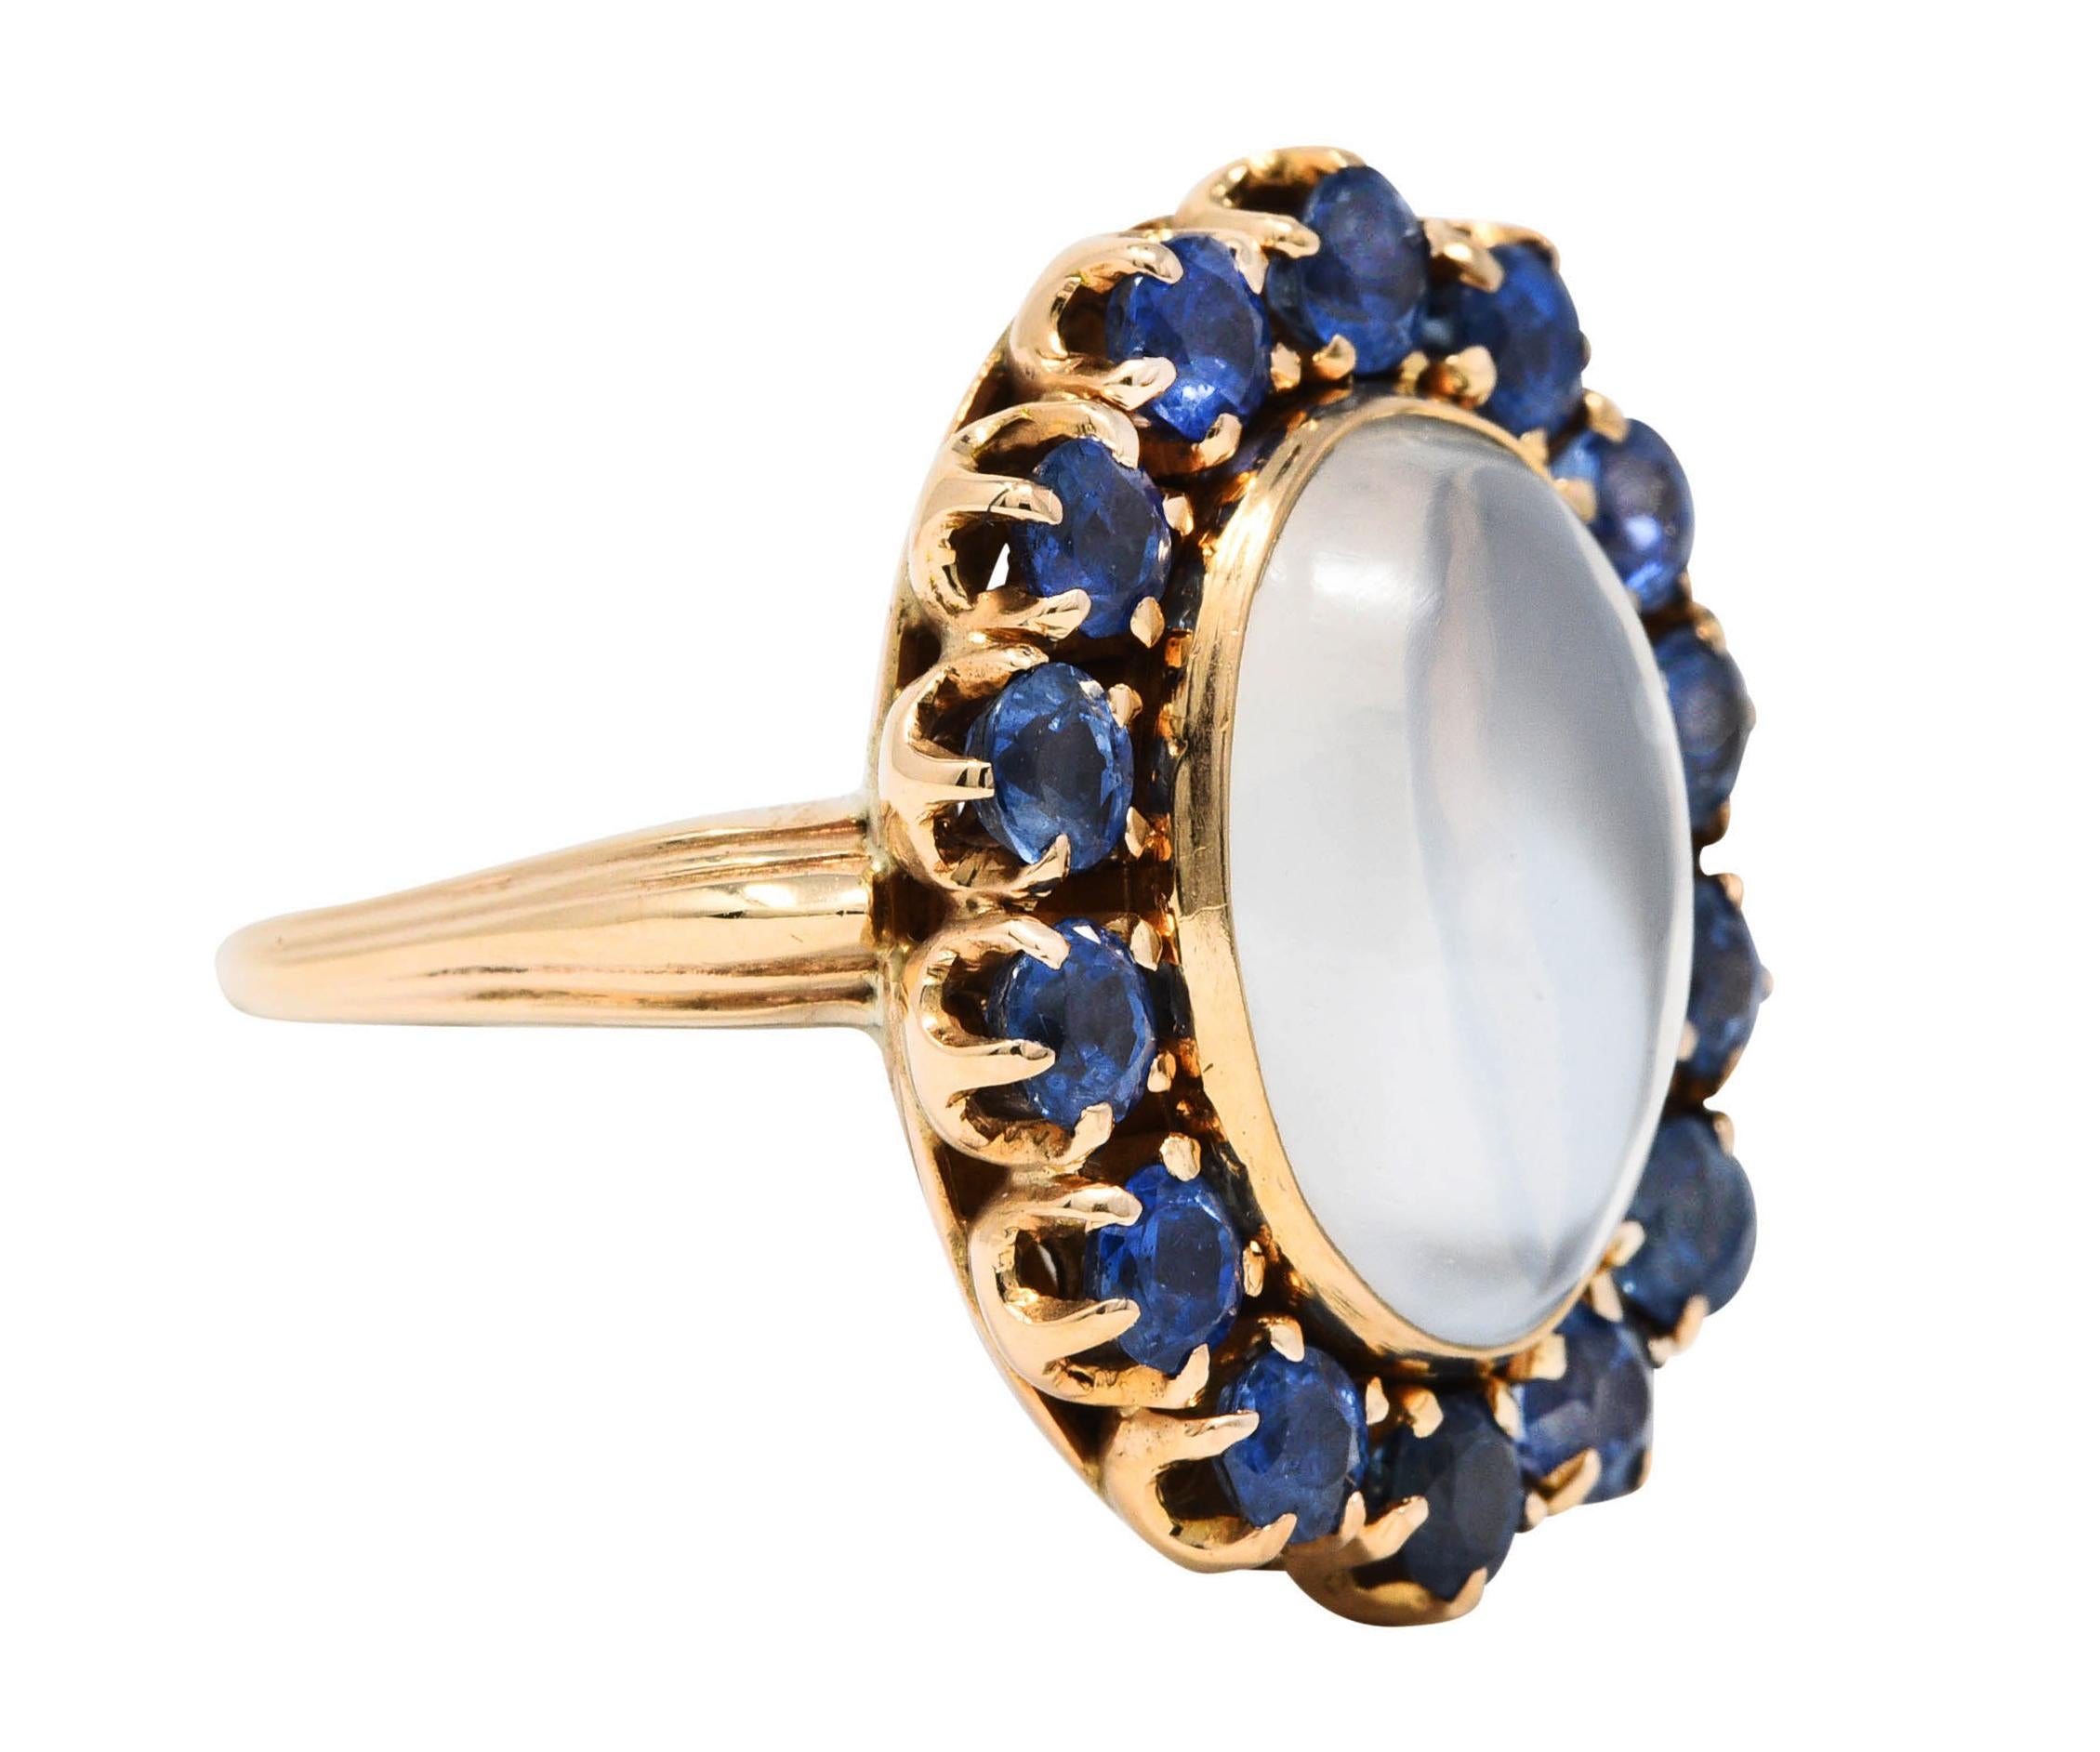 Cluster ring centers an oval moonstone cabochon measuring approximately 13.8 x 9.5 mm

Translucent with strong billowing white adularescence

Surrounded by a halo of round cut sapphires - prong set

A well matched cornflower blue while weighing in